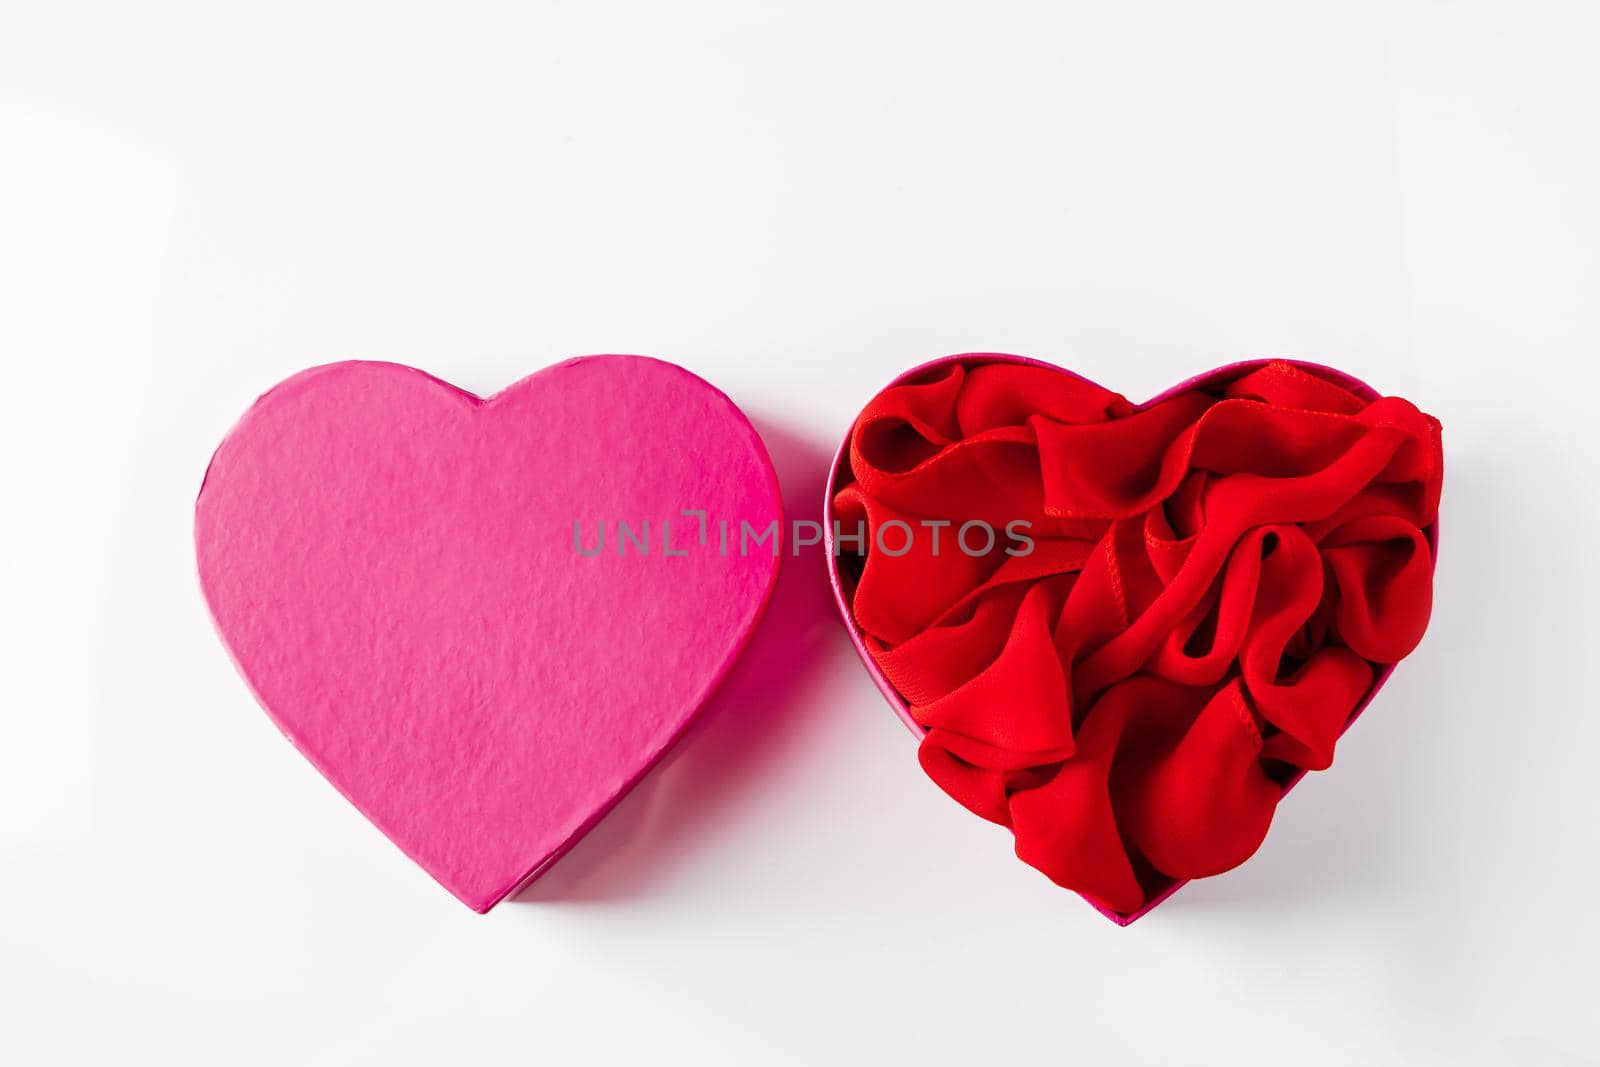 Heart shaped open gift box on white background. Concept for Valentine's Day. Open empty pink heart shaped gift box on a white background.